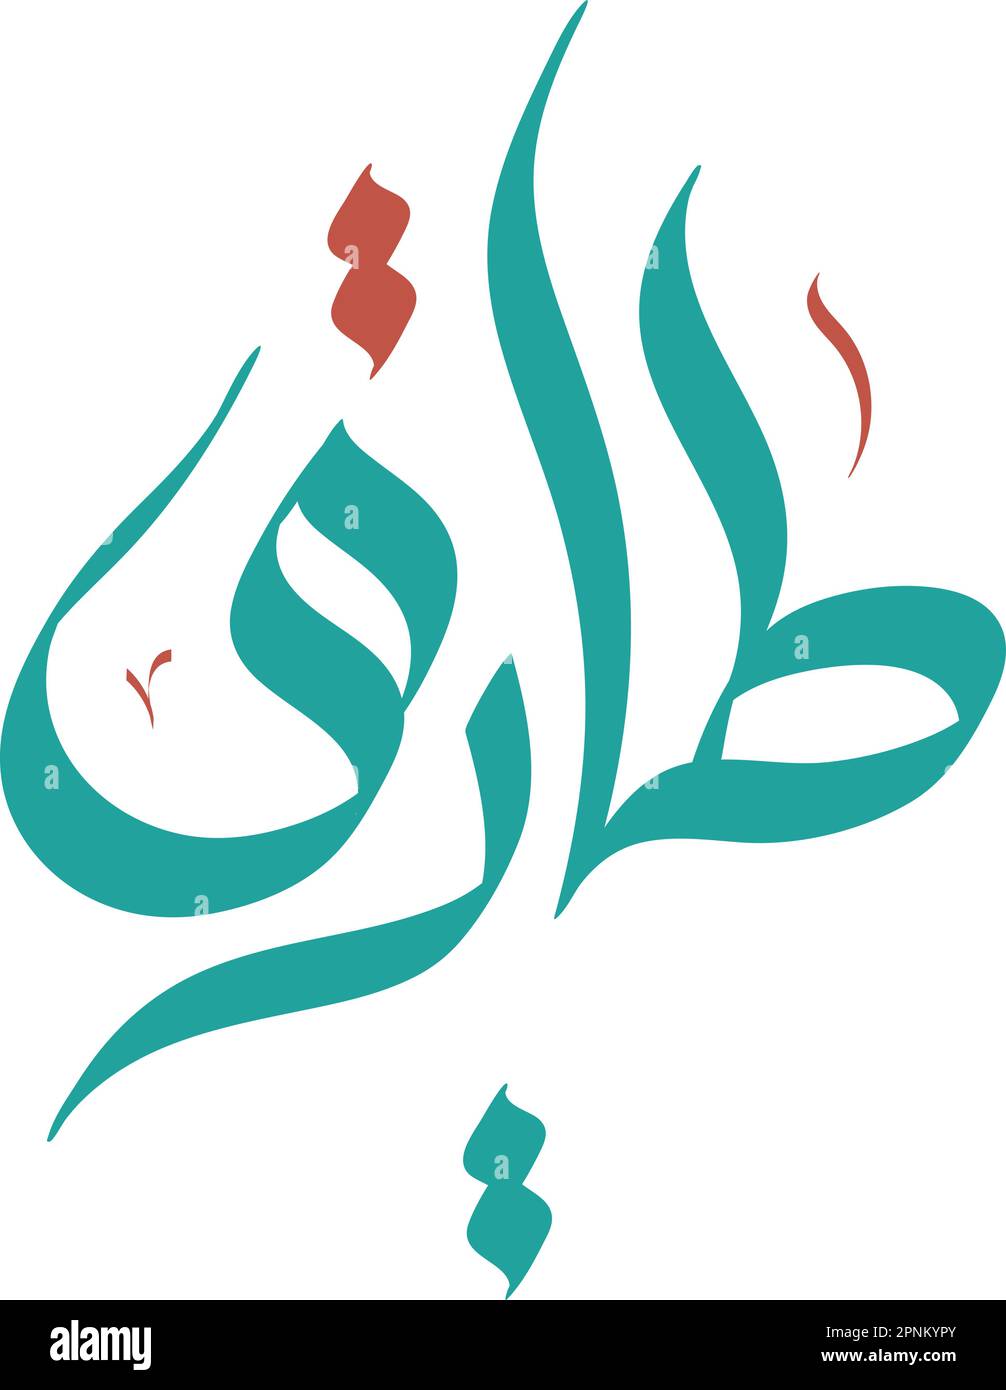 Arabic writing artwork Cut Out Stock Images & Pictures - Alamy